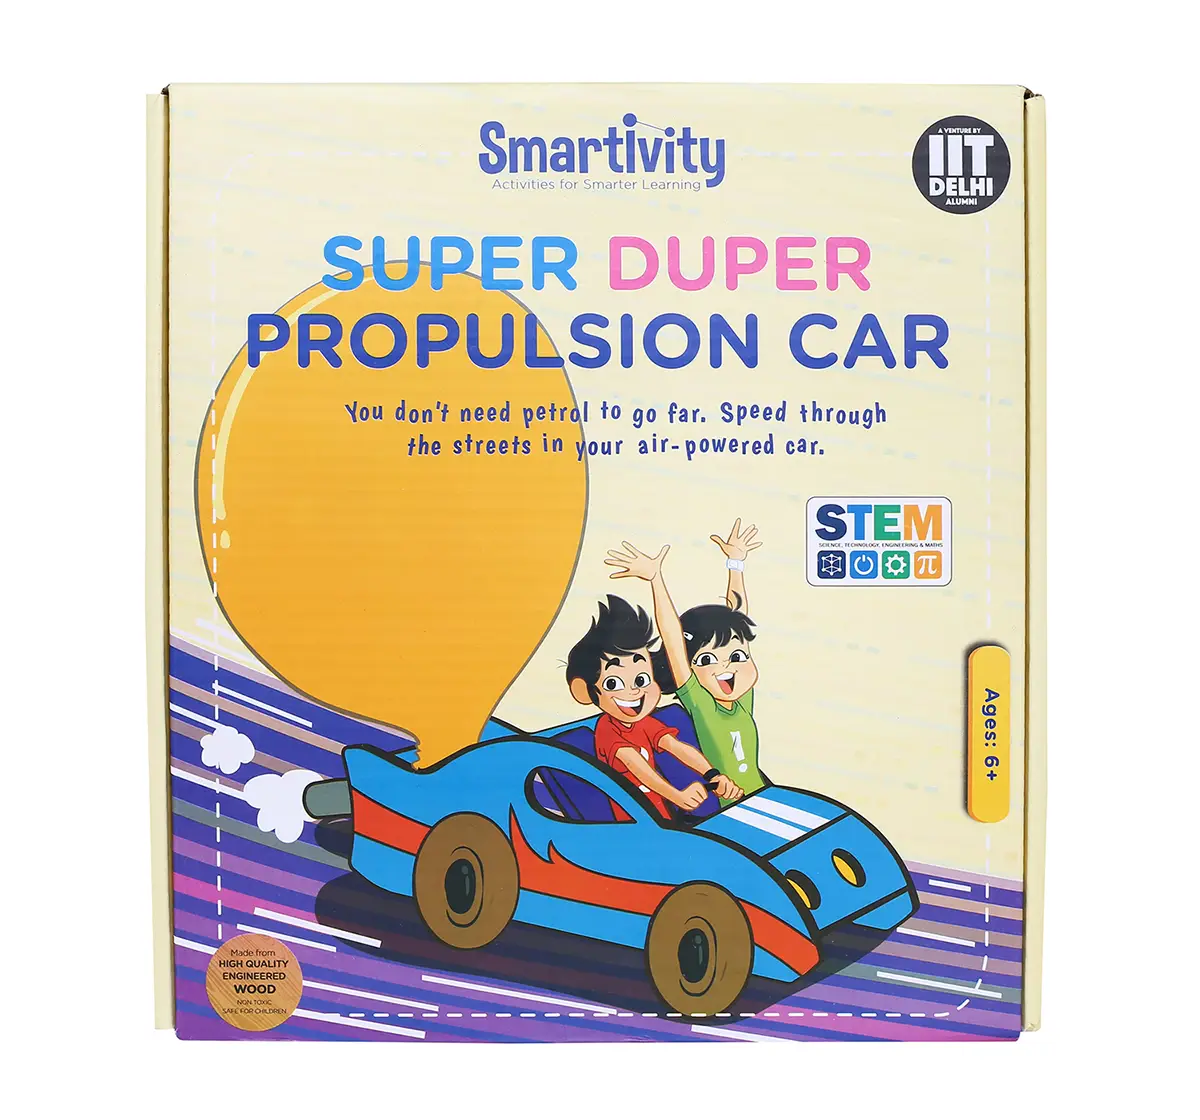 Smartivity Super Duper Propulsion Car: Stem, Learning, Educational And Construction Activity Toy Gift for Kids age 6Y+  (Multi-Color)